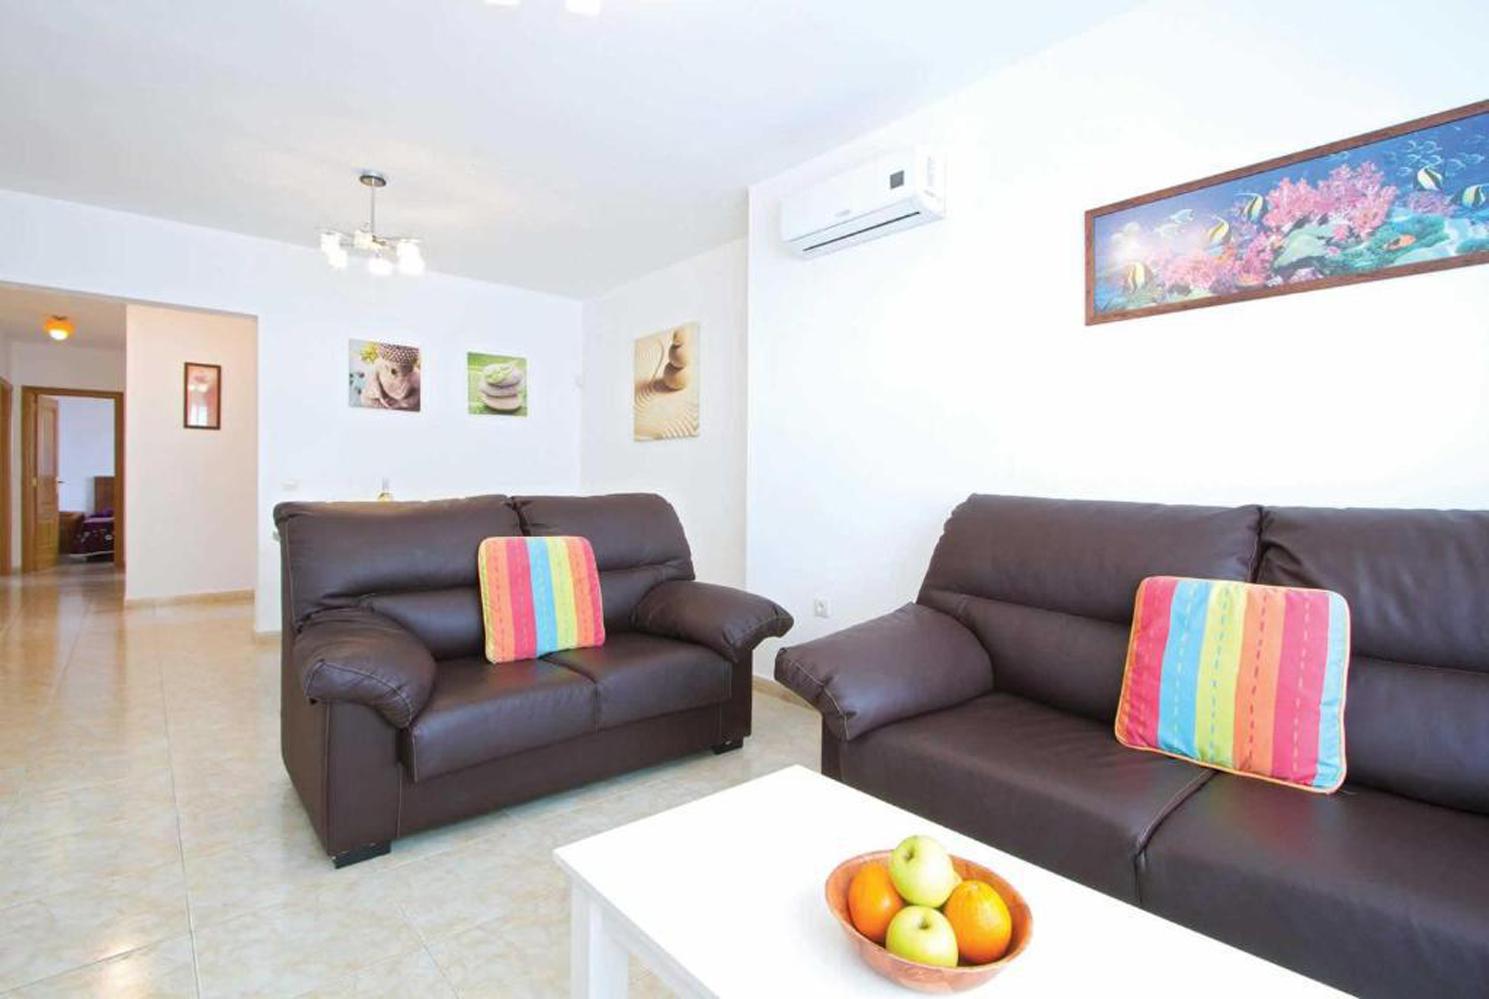 Open plan living room with comfortable sofas, WiFi, TV, A/C